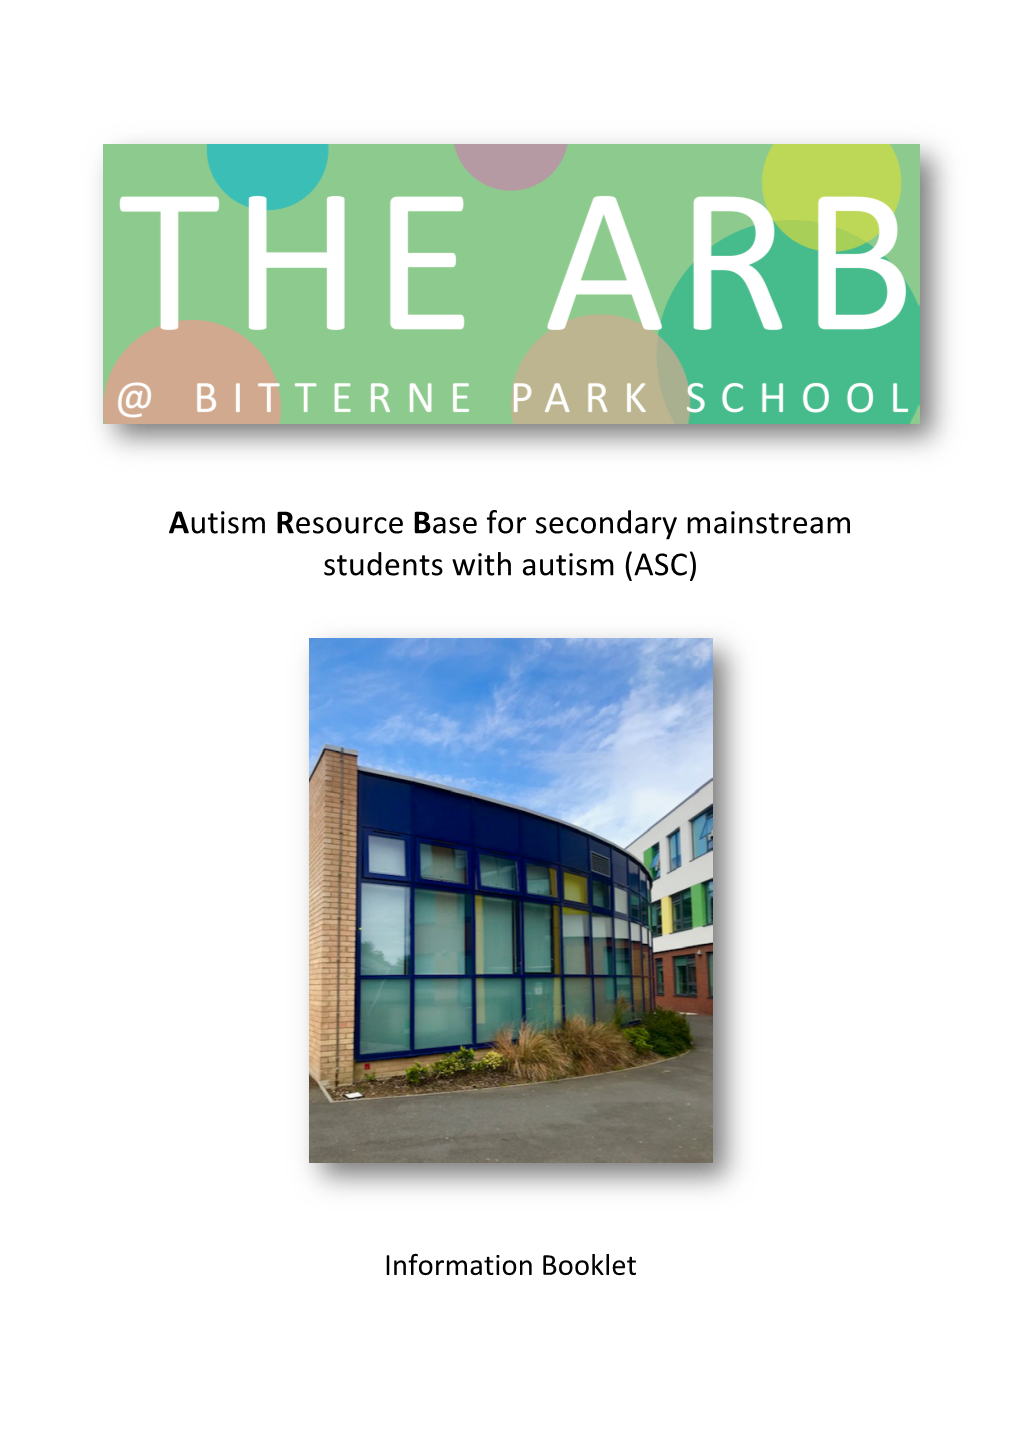 Autism Resource Base for Secondary Mainstream Students with Autism (ASC)